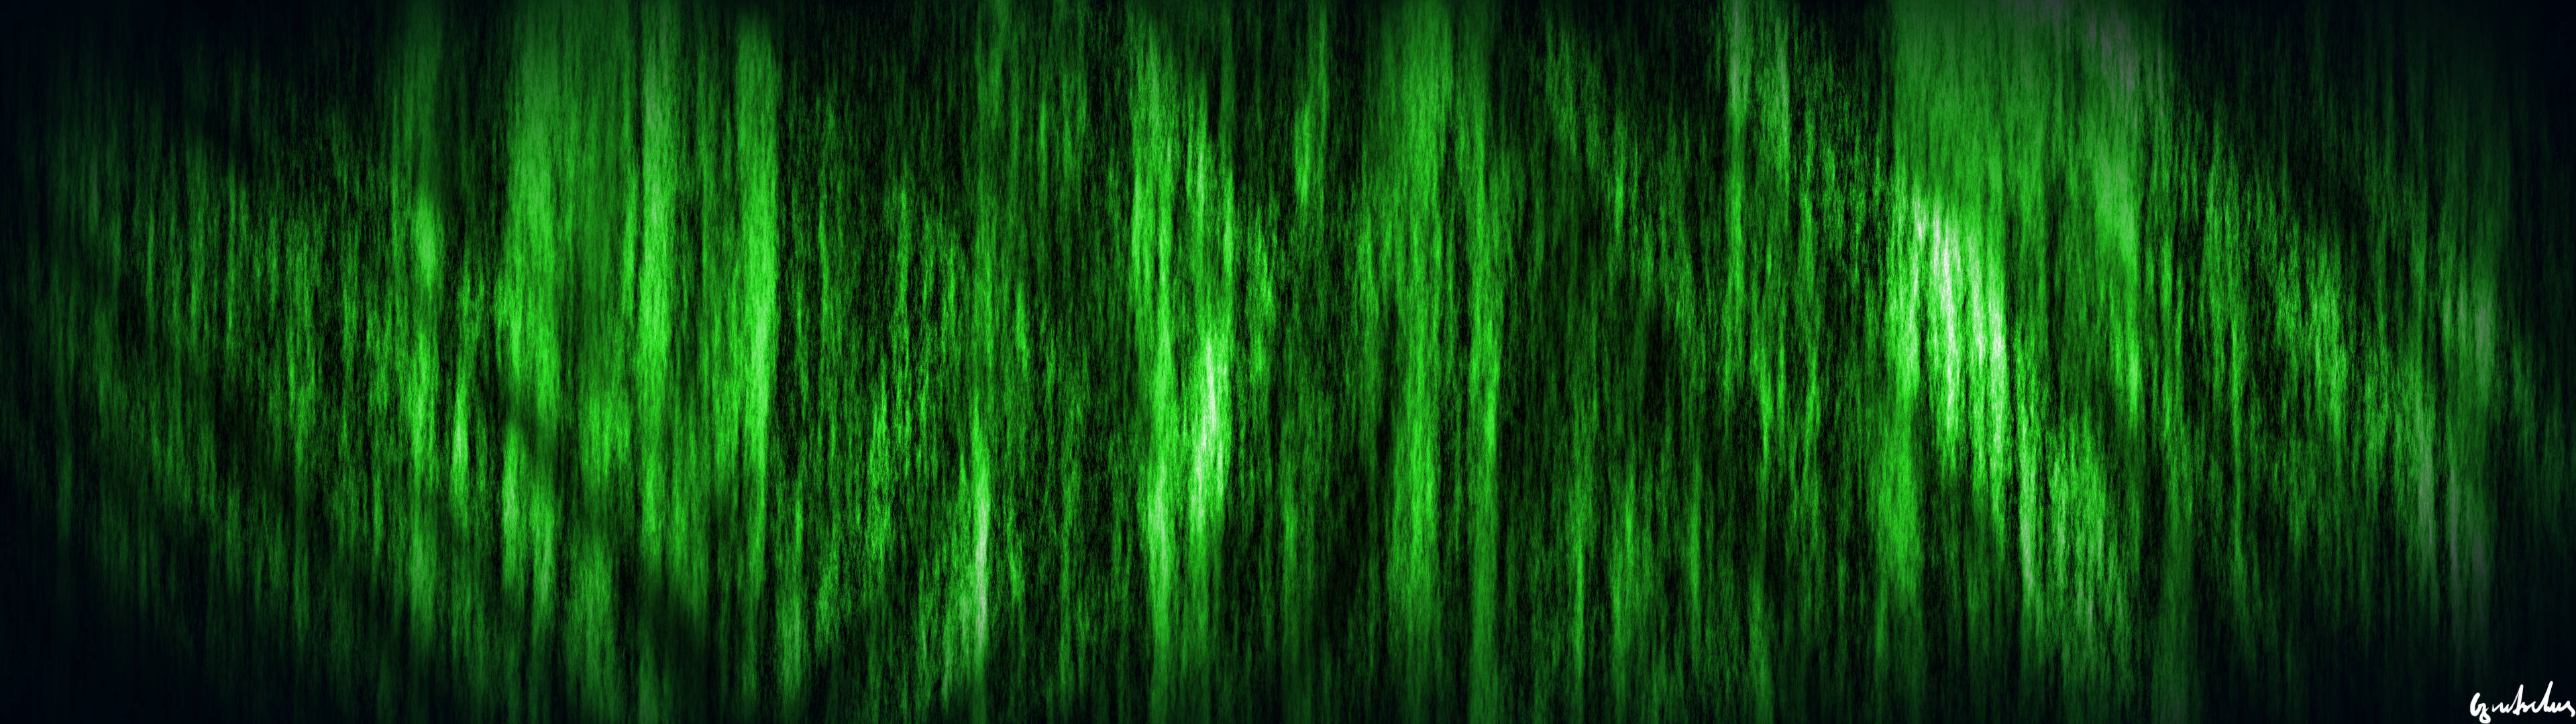 Black And Green Fuzzy Background